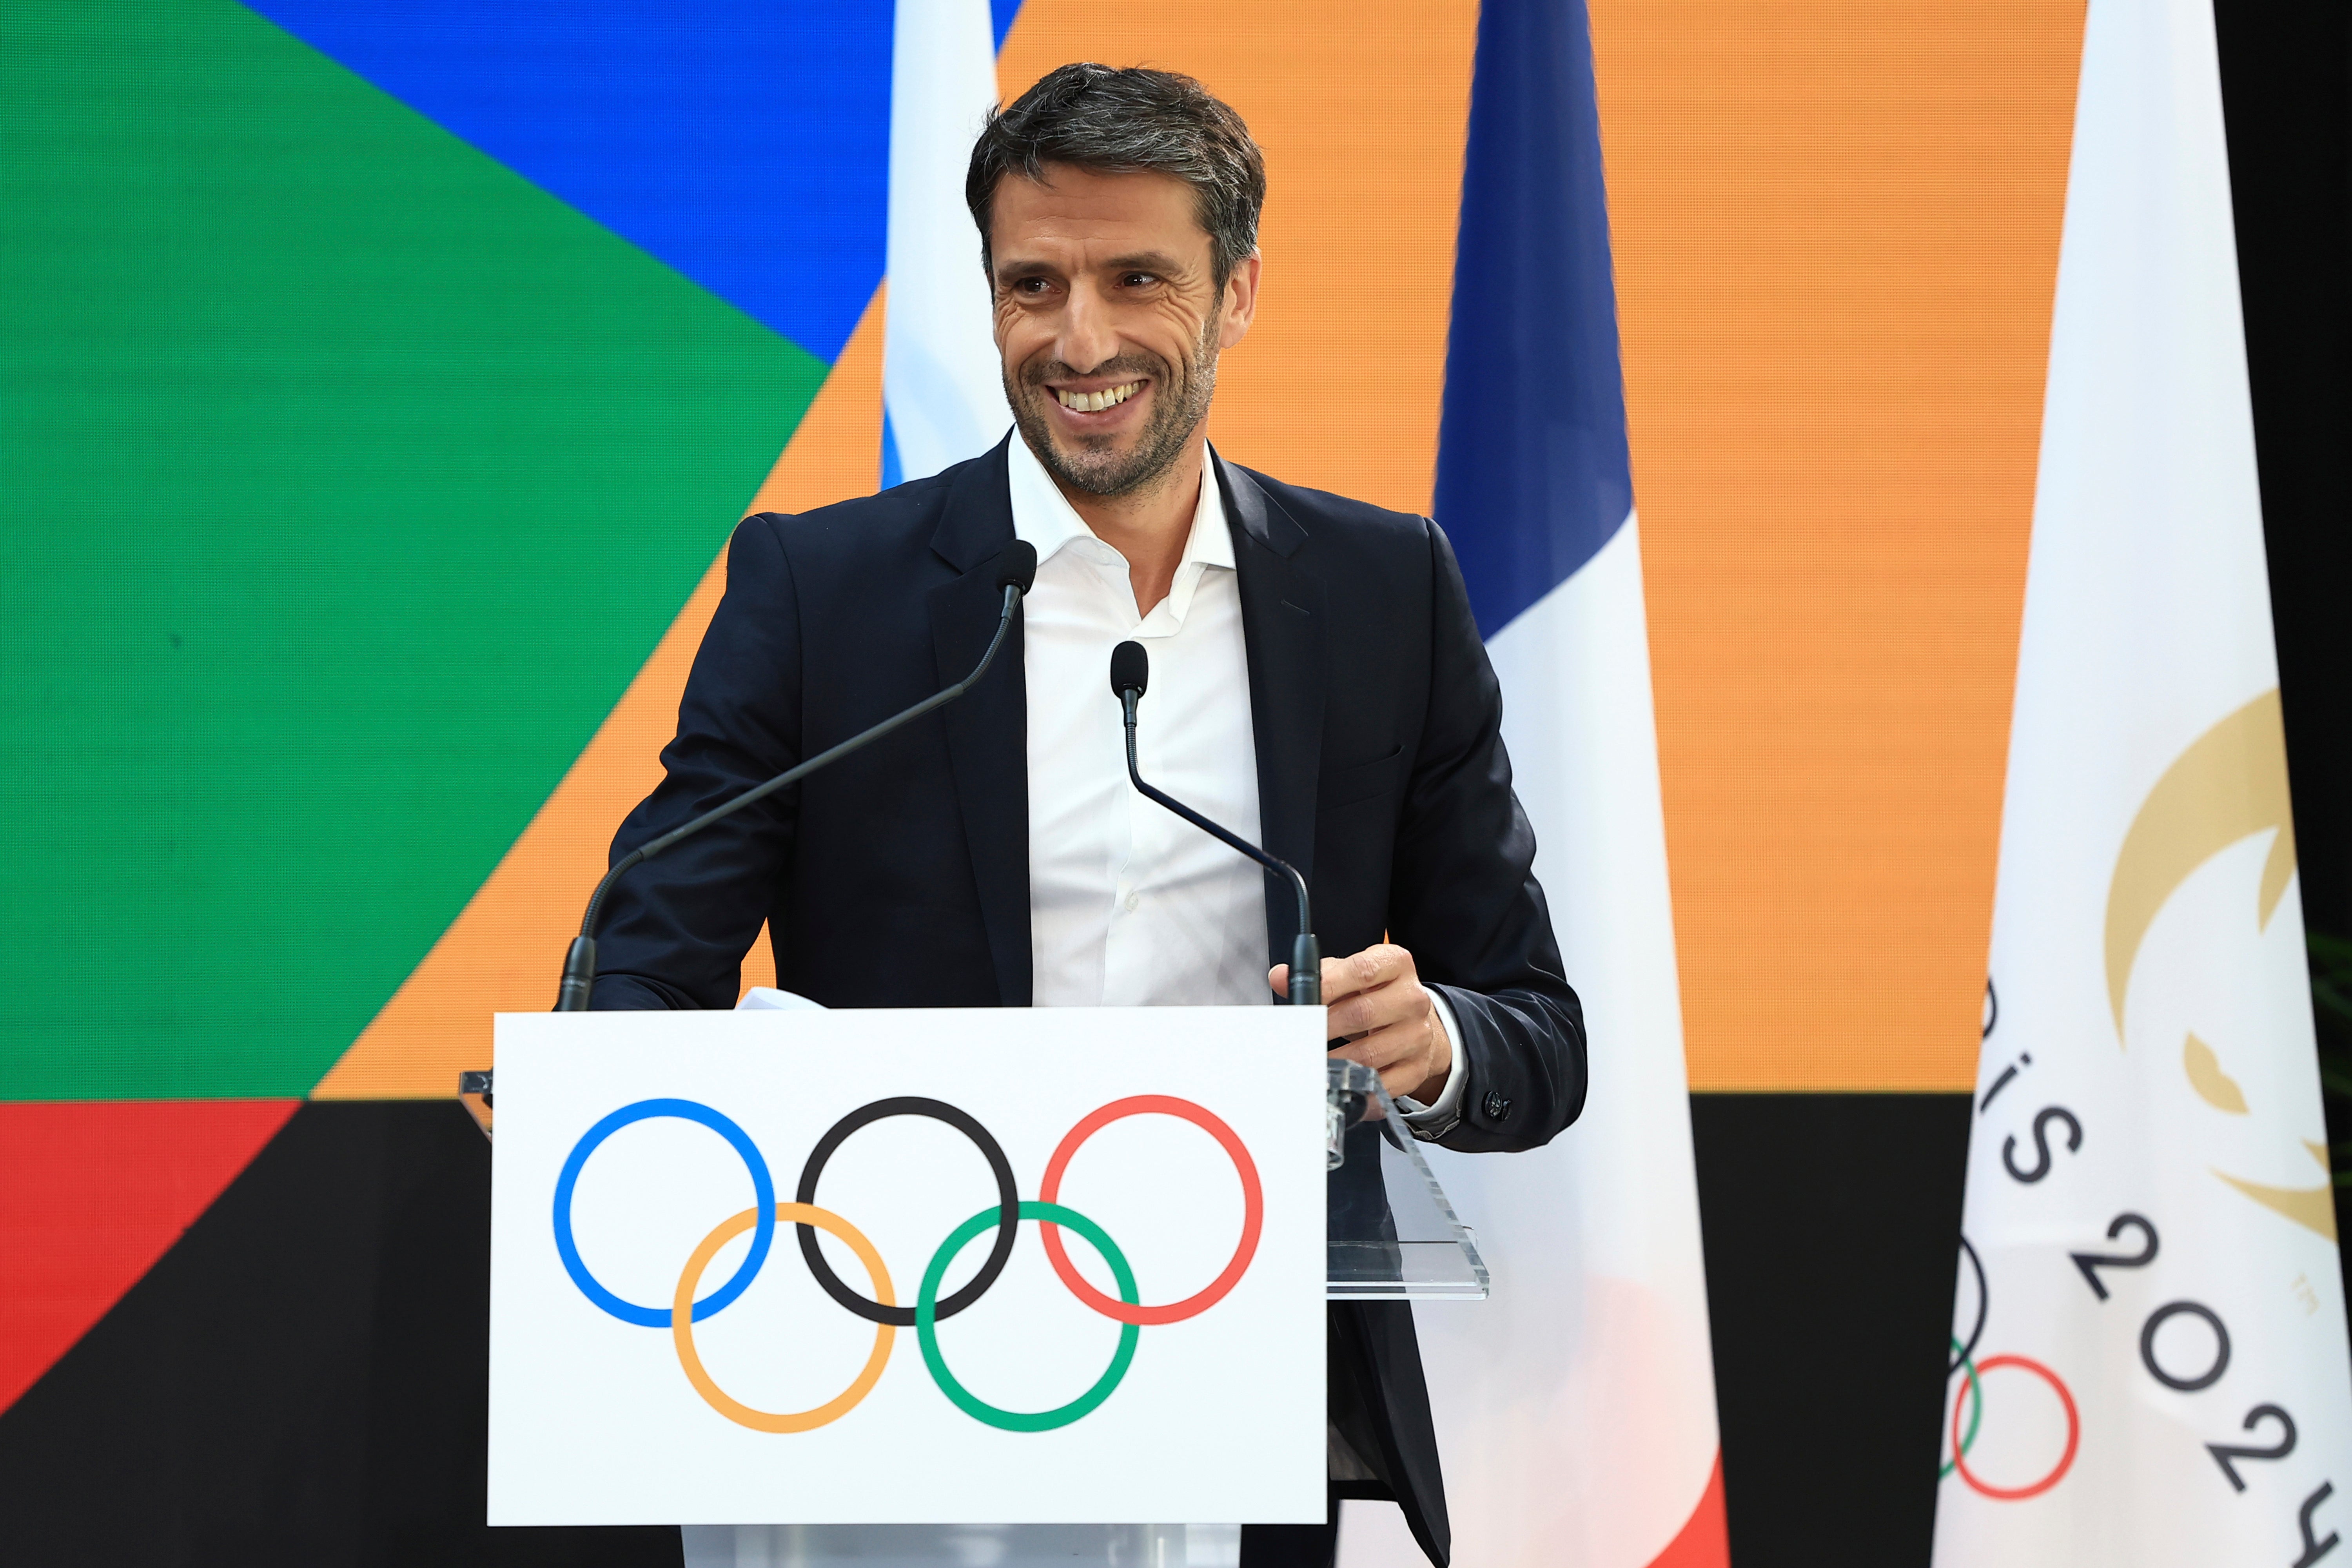 The pay of Paris 2024 president Tony Estanguet is also under review